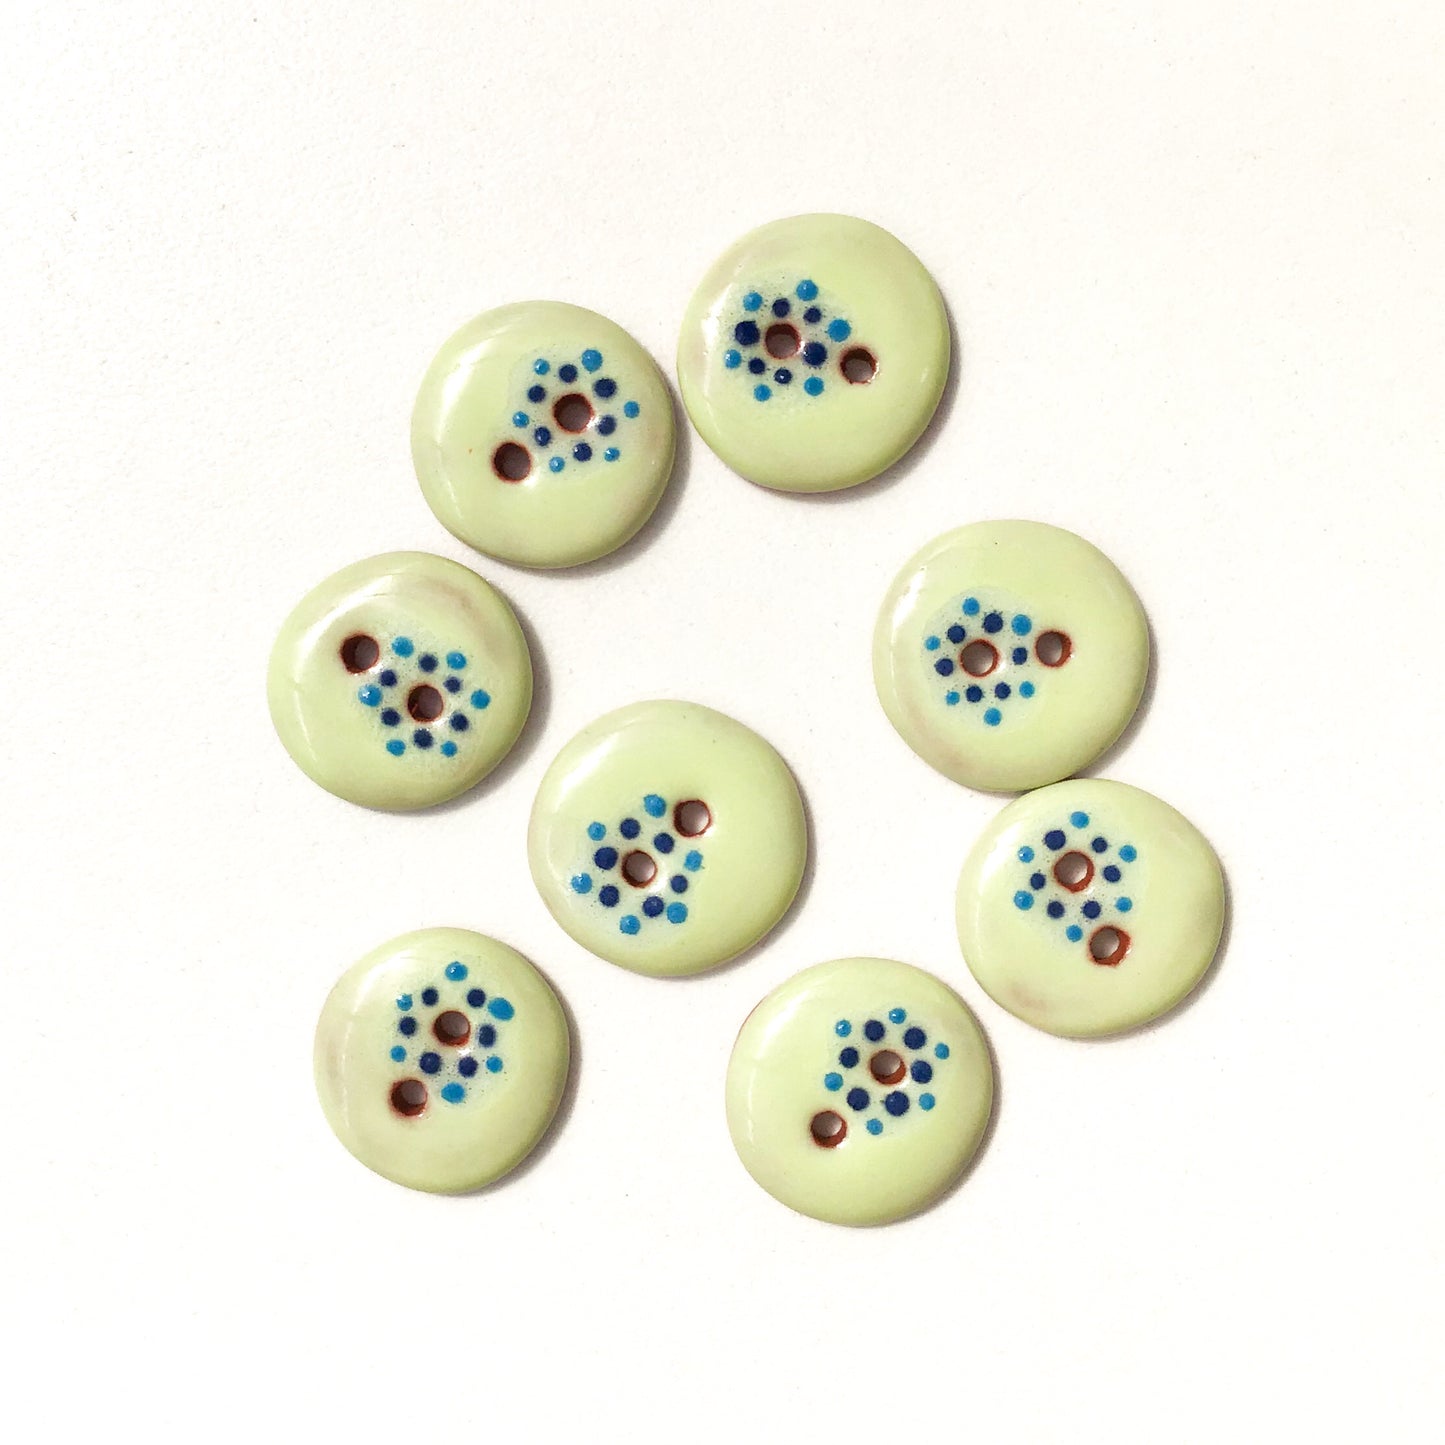 Honeydew "Spark" Ceramic Buttons - Yellow / Green Clay Buttons - 5/8" - 8 Pack